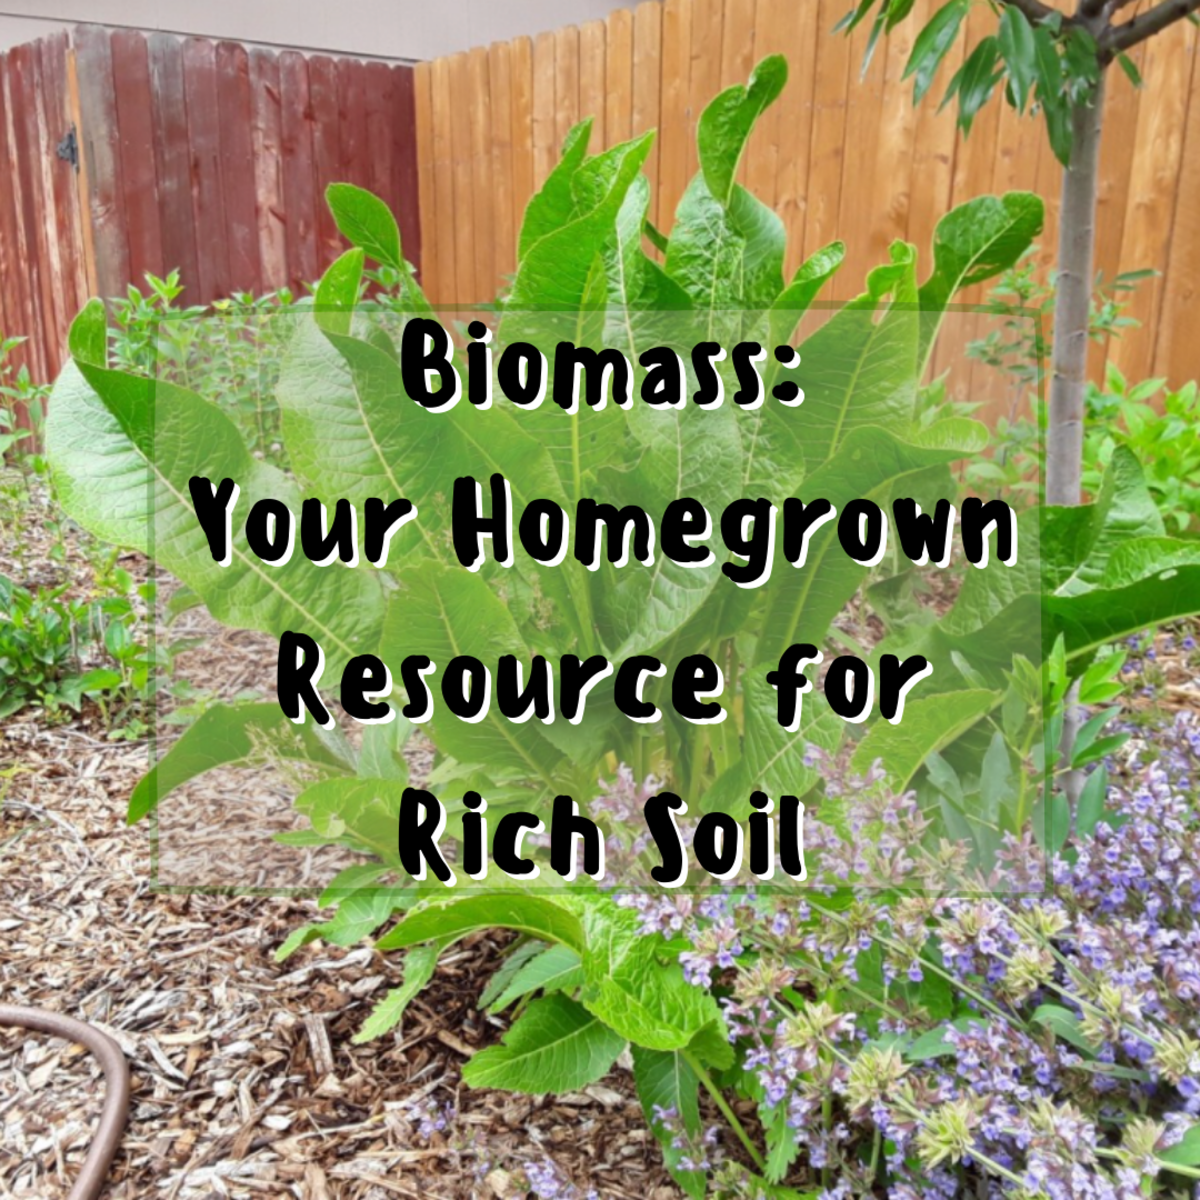 Biomass: Your Homegrown Resource for Rich Soil